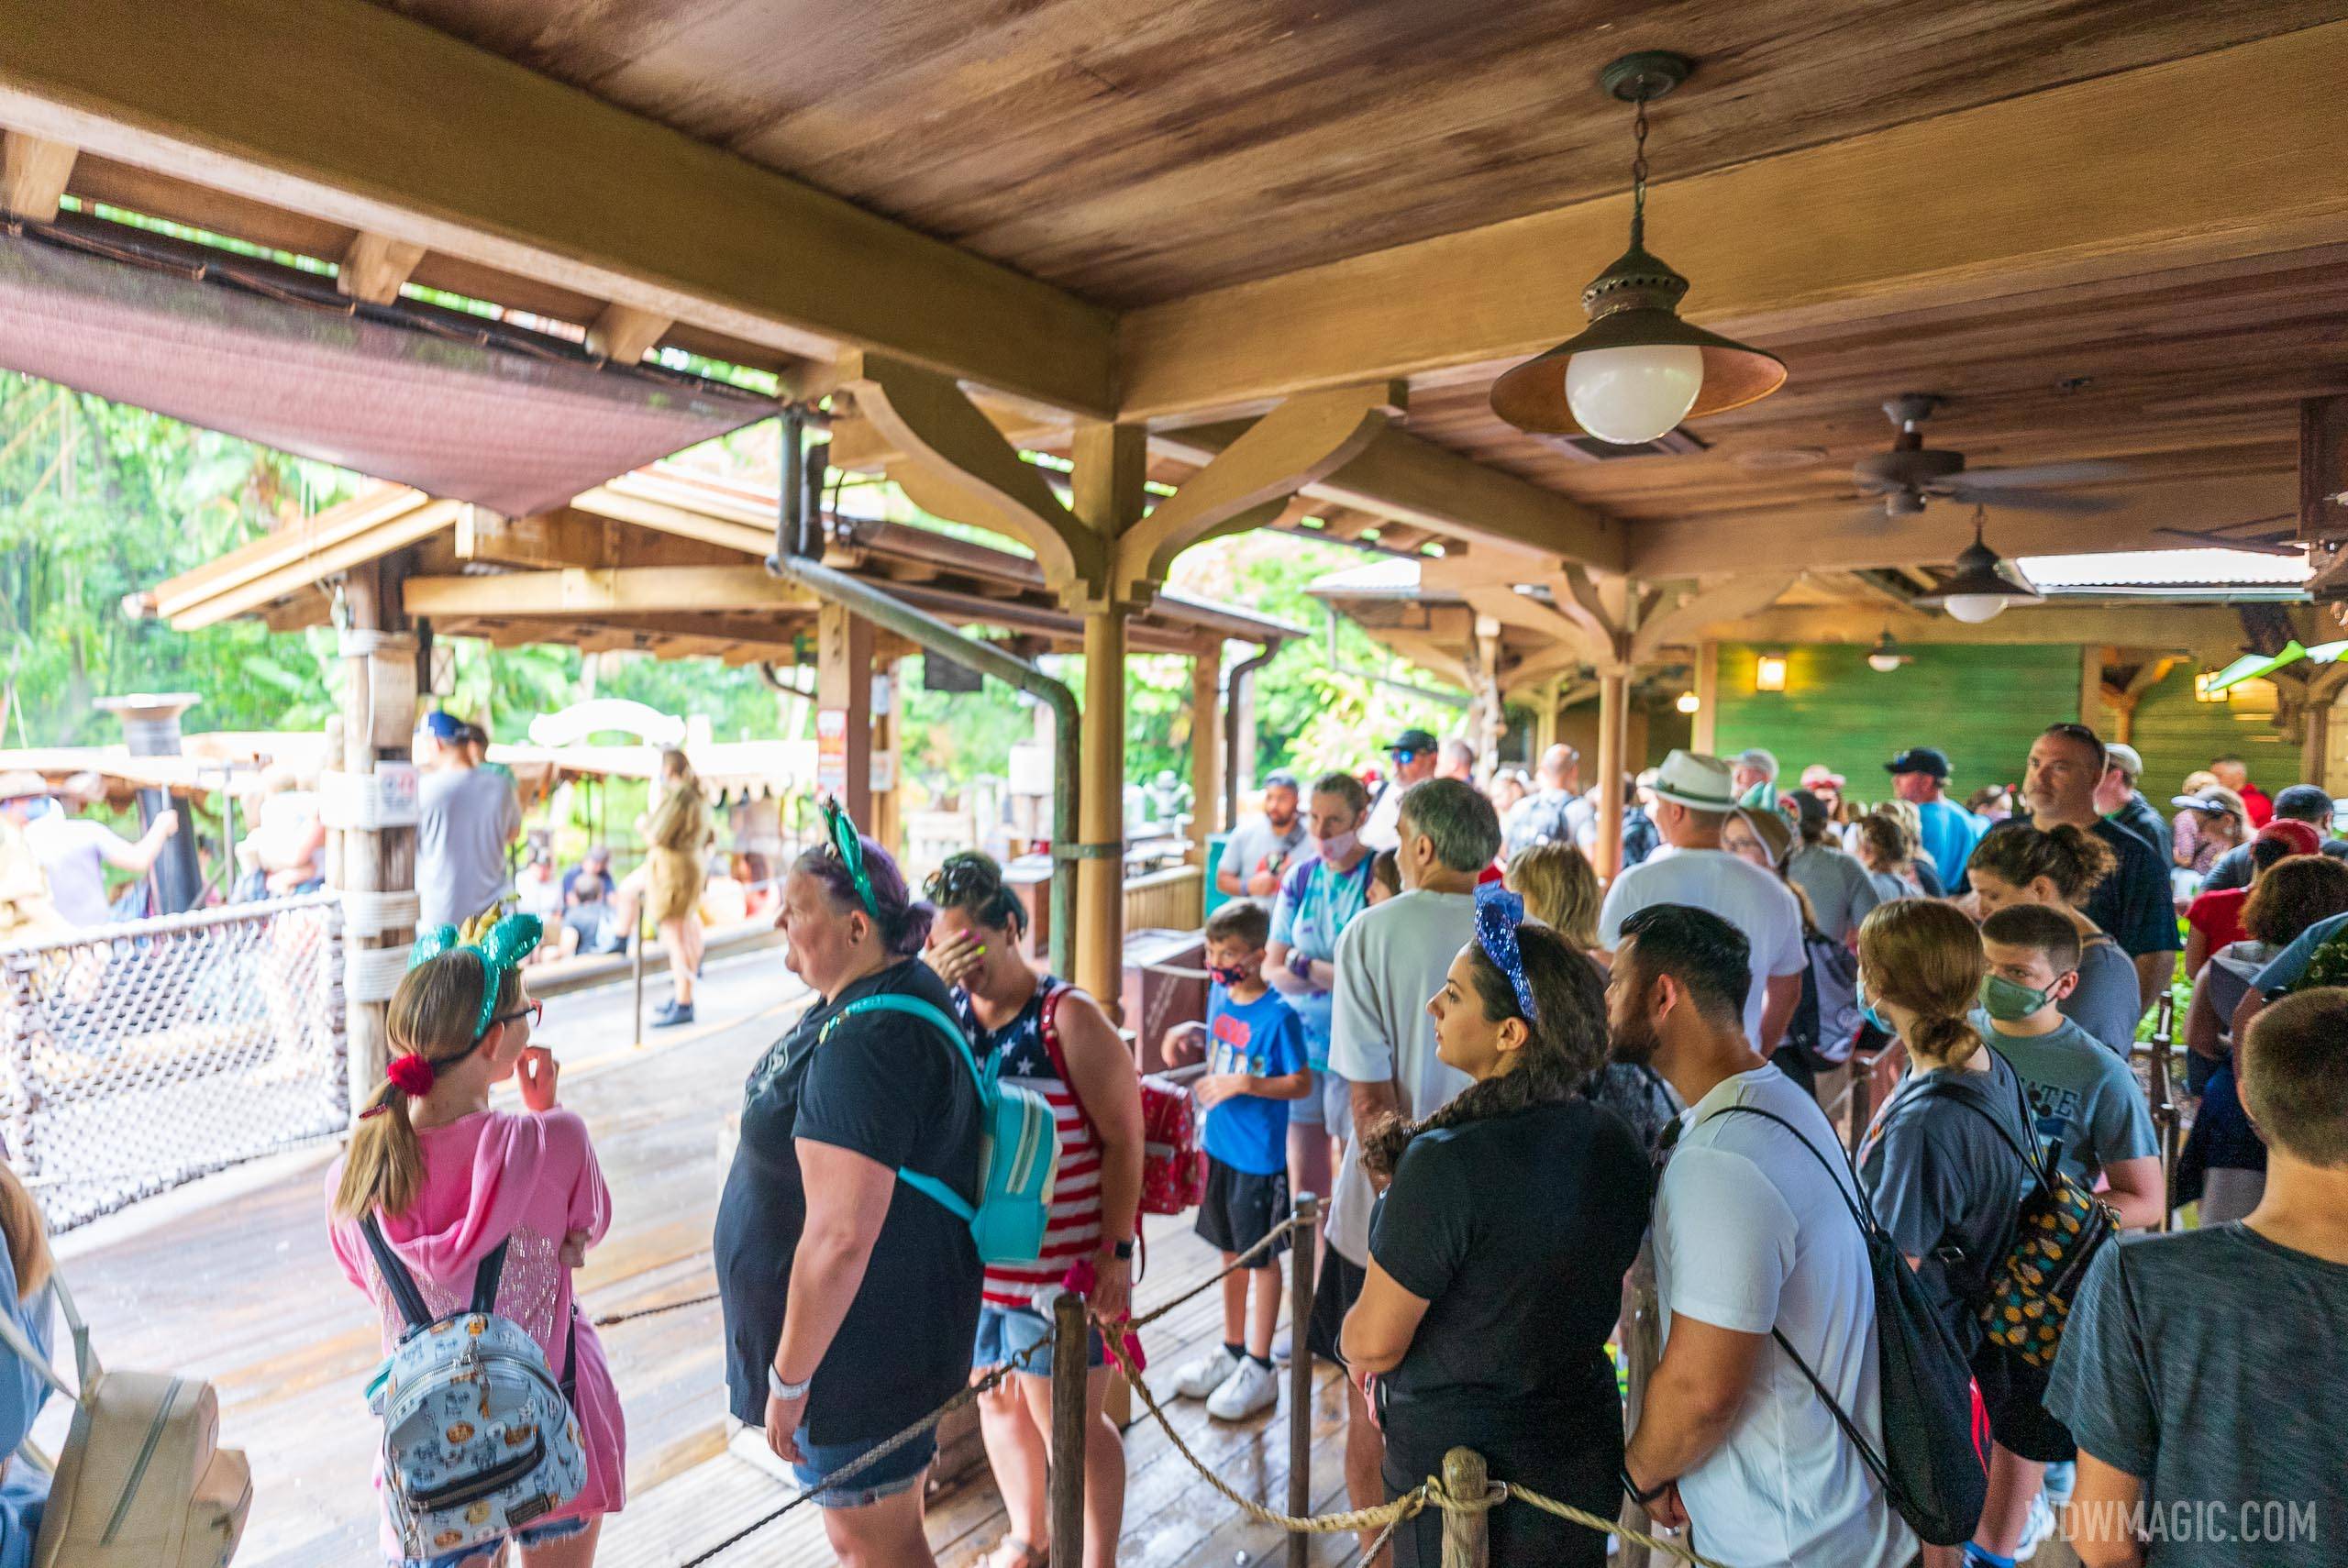 Guests can now enter queues and rides with no masks